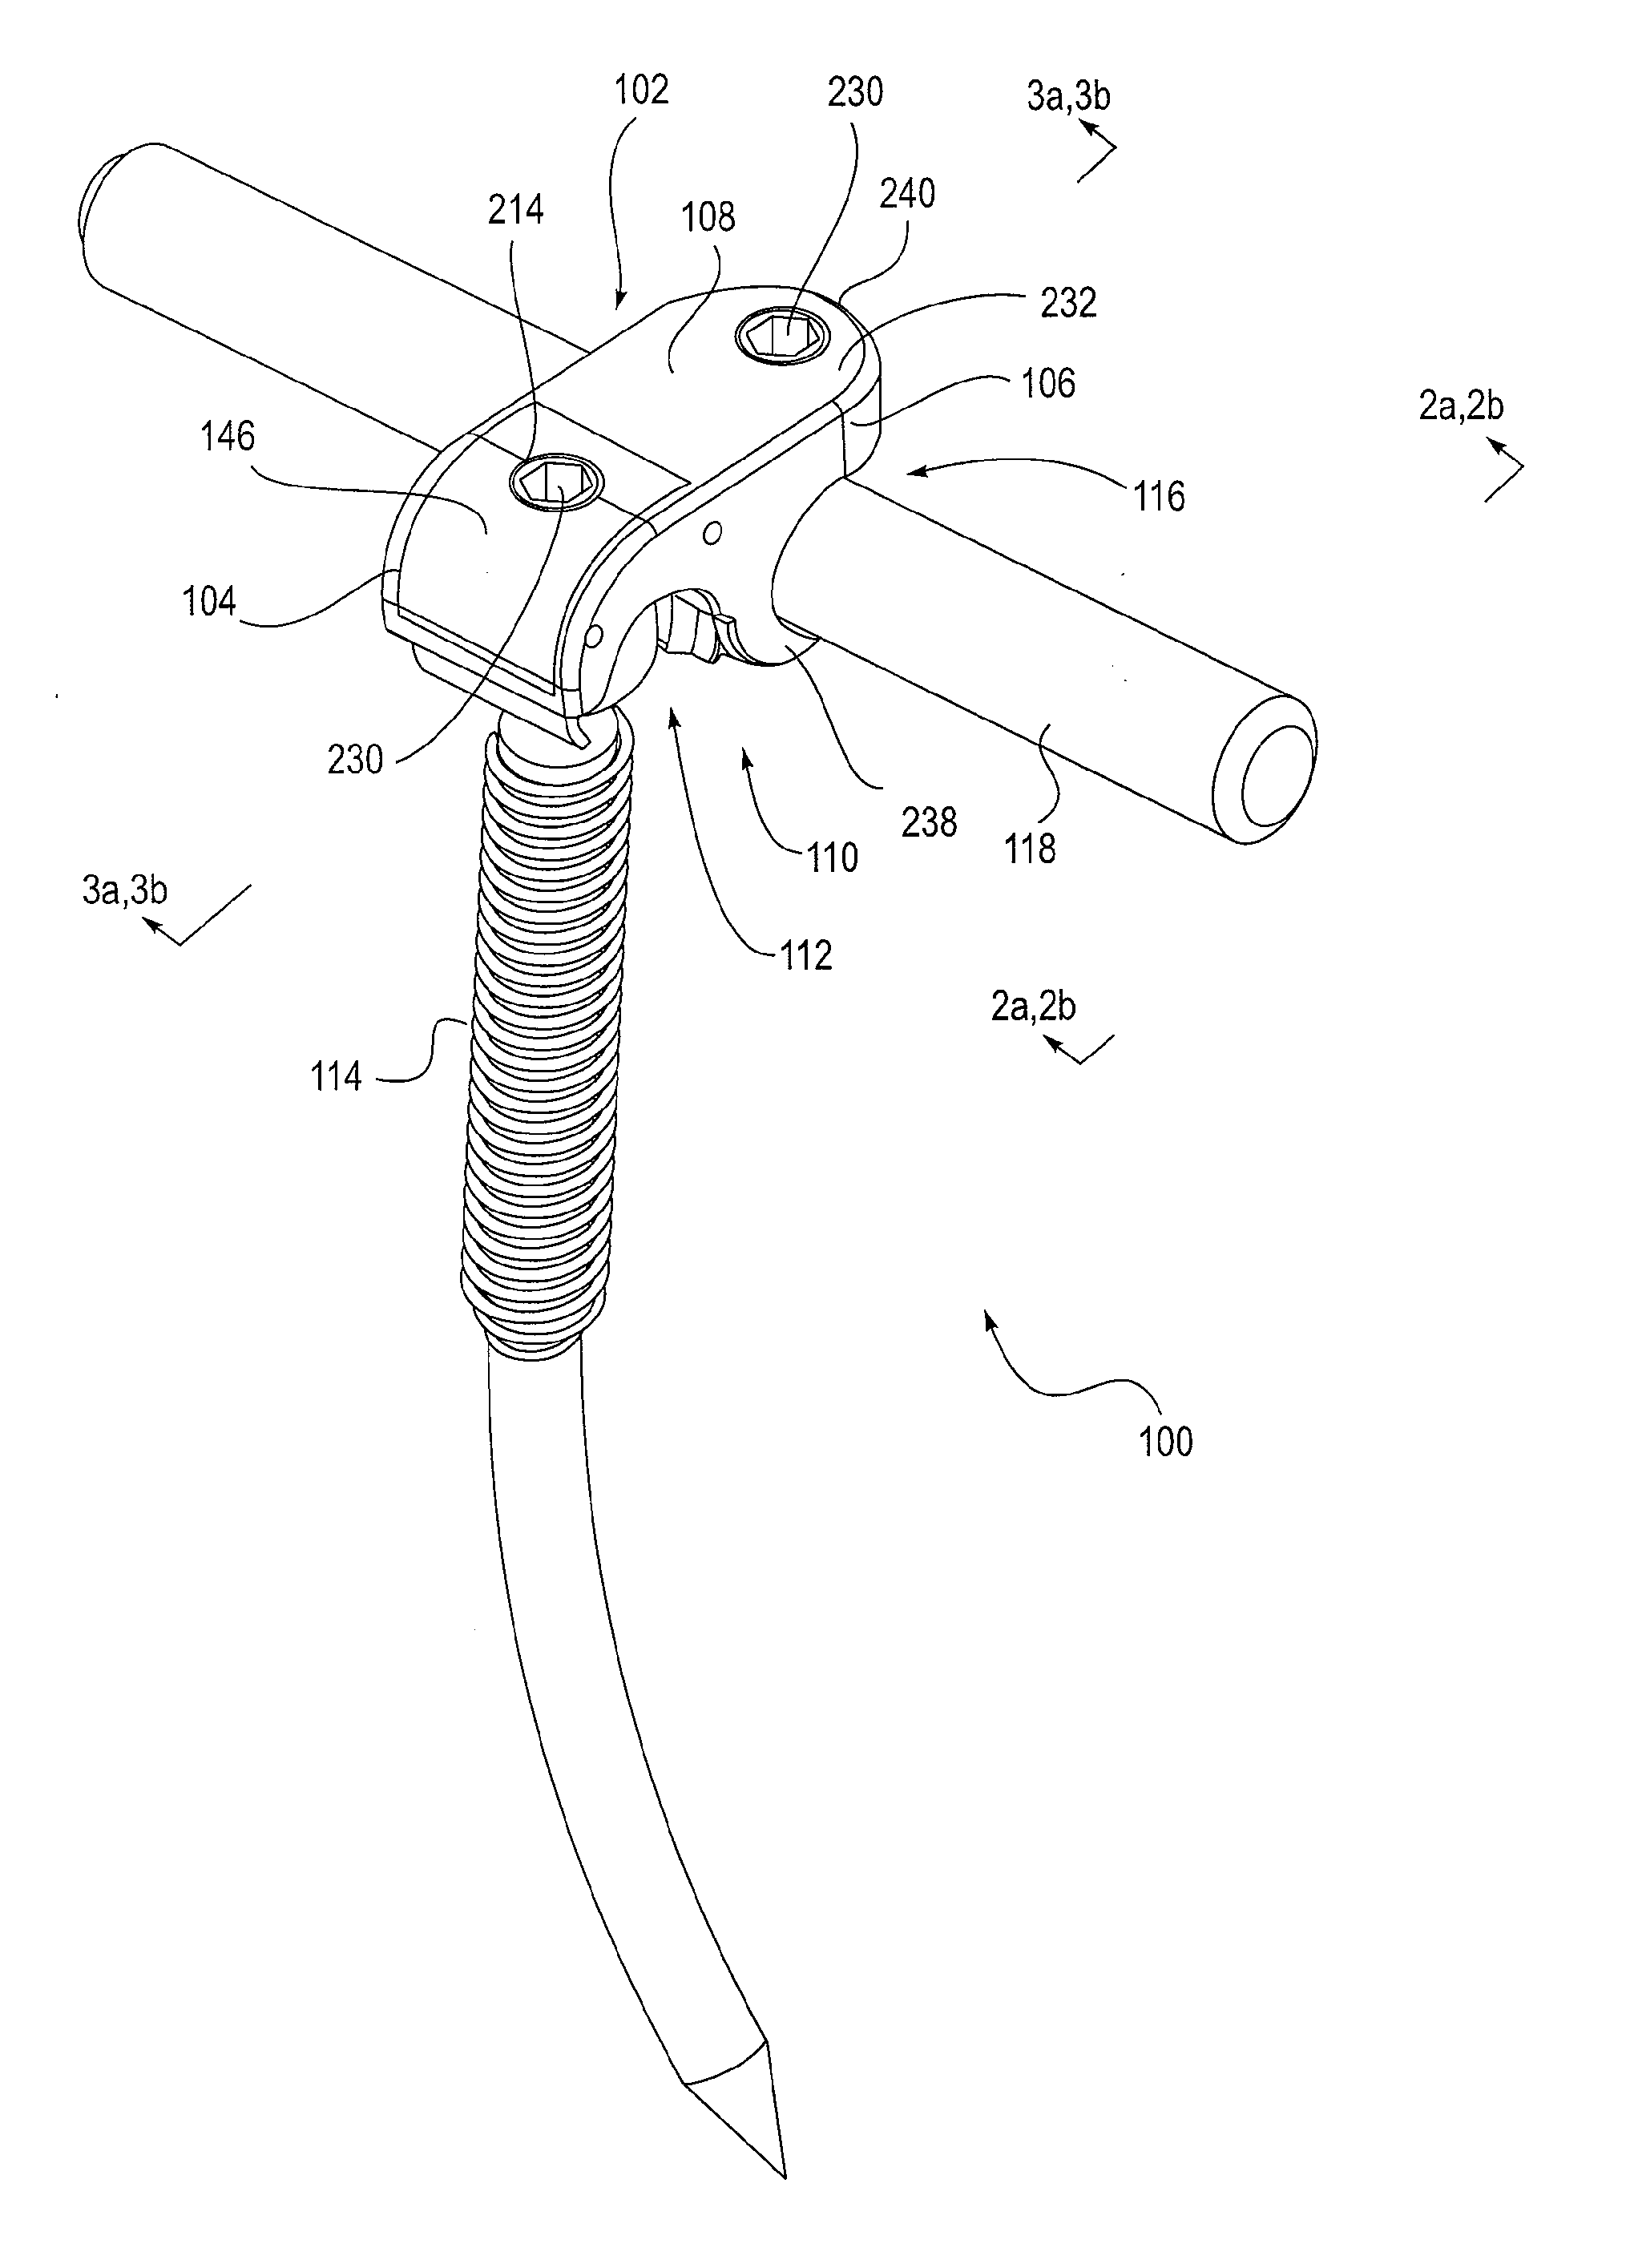 Spinal connection assembly